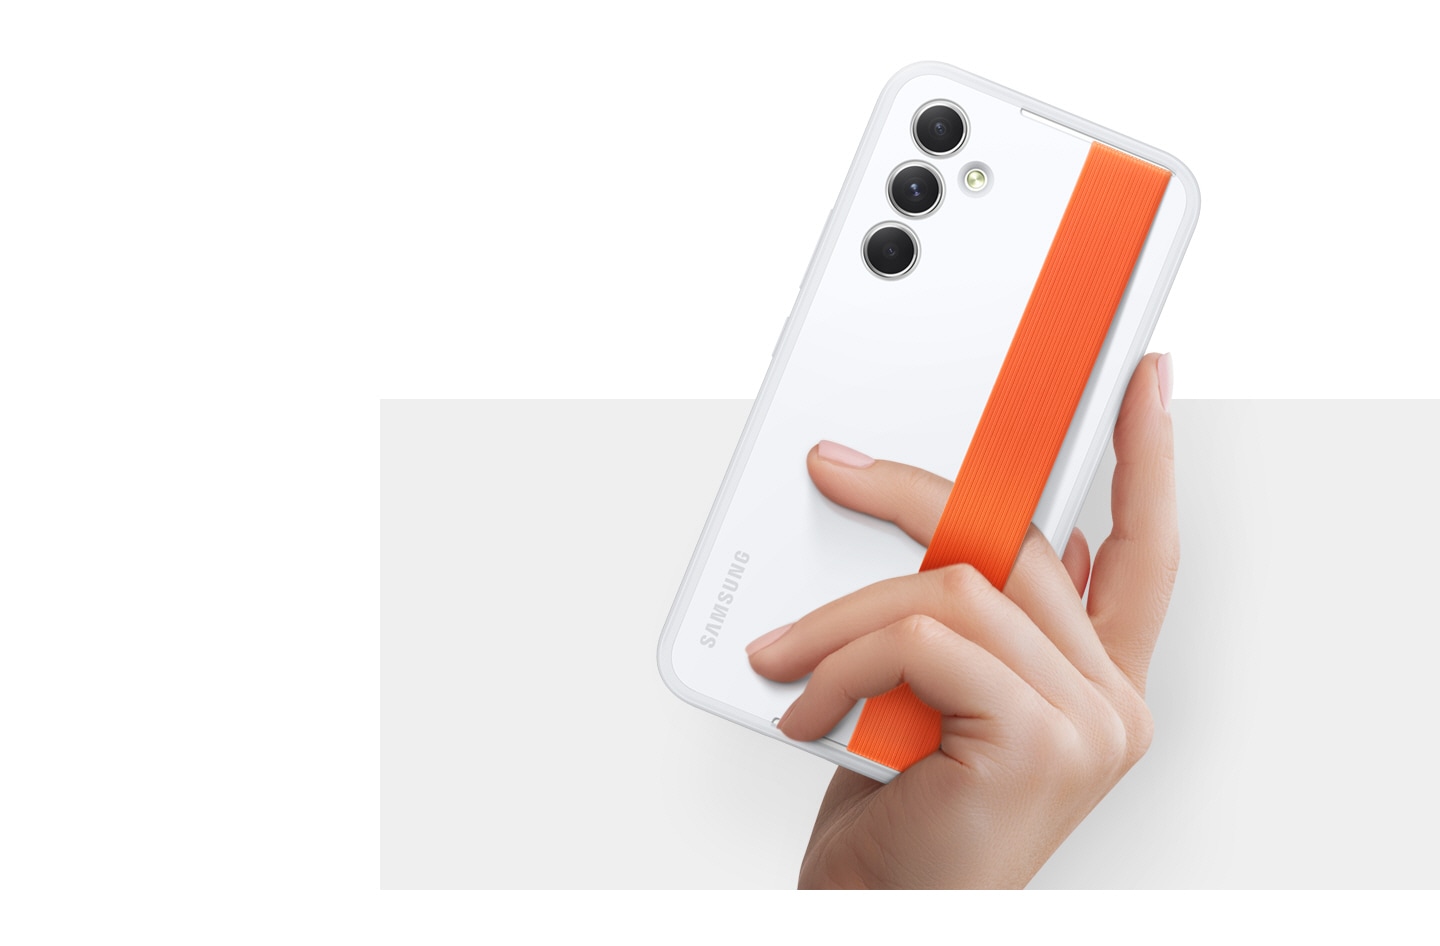 A hand holds up a Galaxy device wearing a white Haze Grip Case with an orange strap.